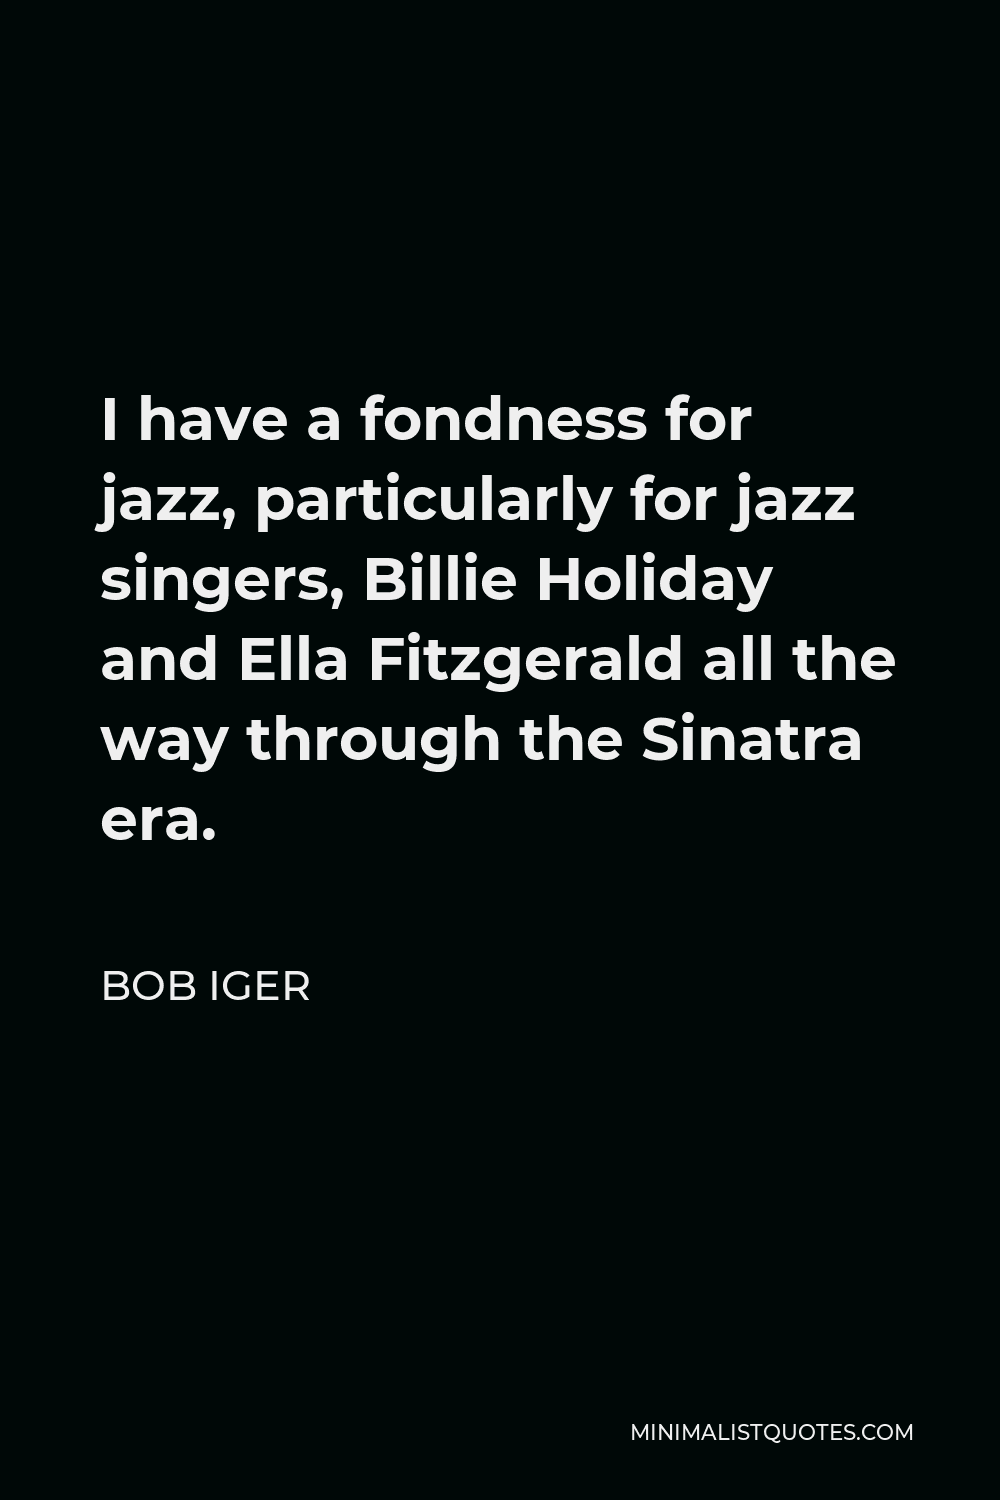 Bob Iger Quote - I have a fondness for jazz, particularly for jazz singers, Billie Holiday and Ella Fitzgerald all the way through the Sinatra era.